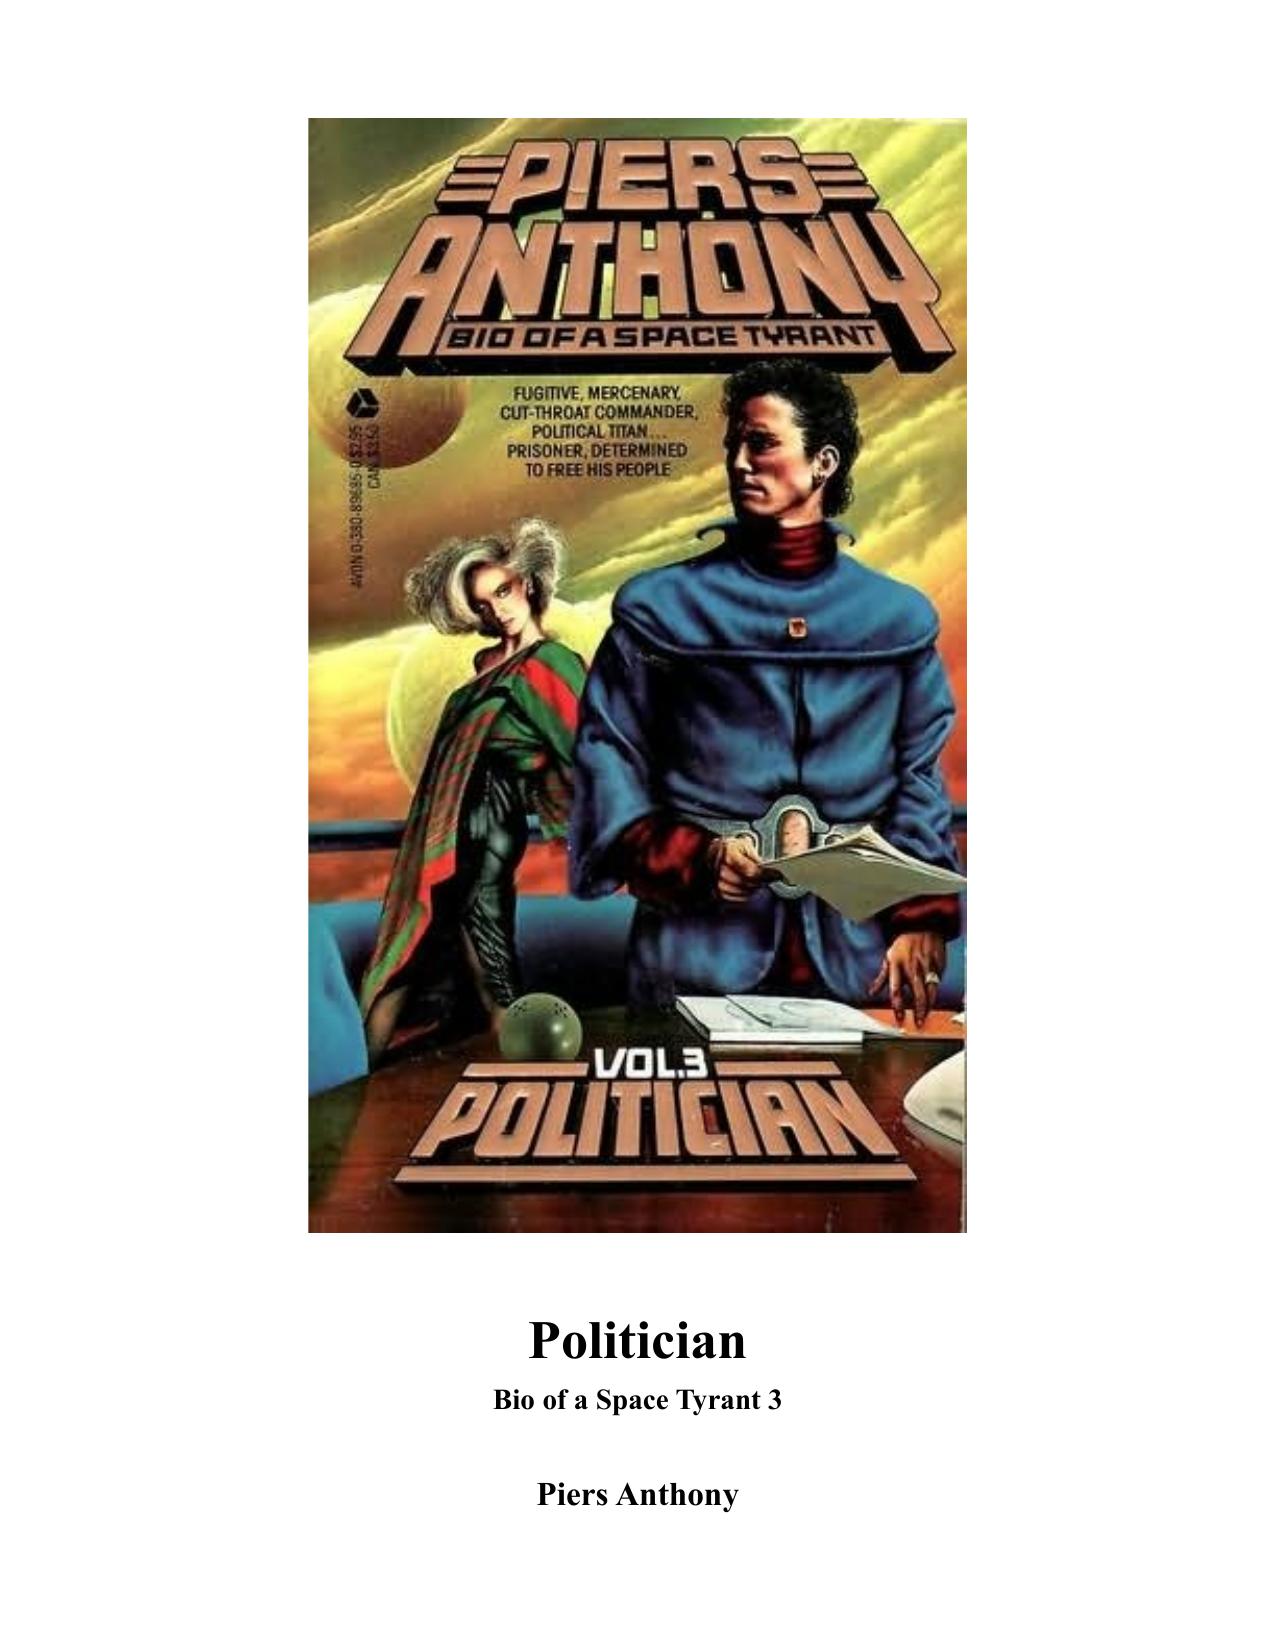 Politician by Piers Anthony